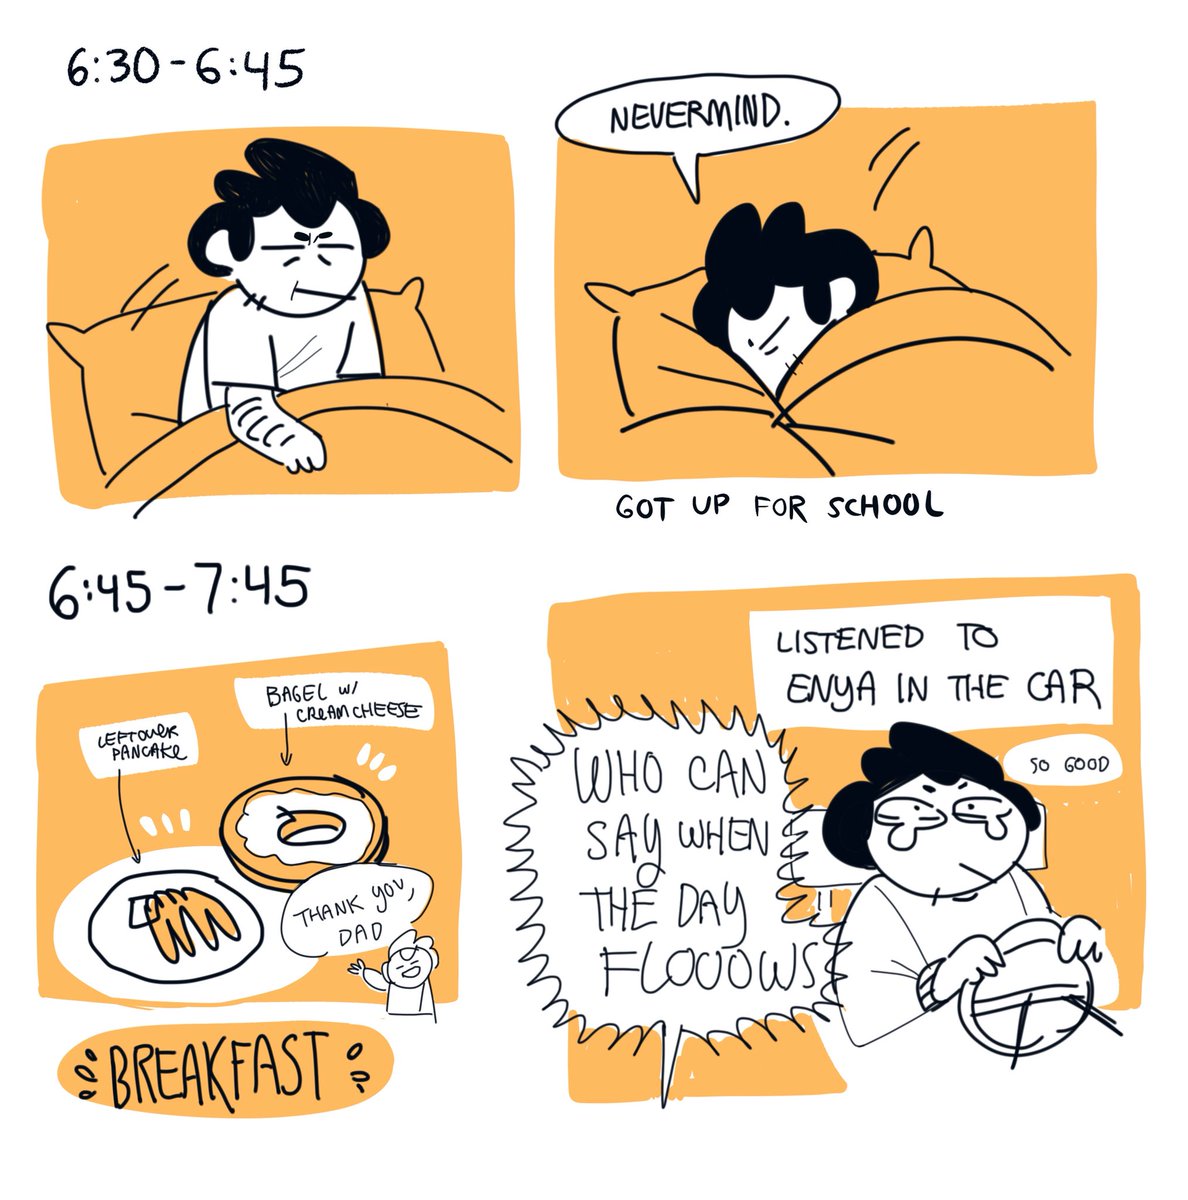 Completely forgot about #hourlycomicday! If only they set this up on a weekend amirite, y'all???? 